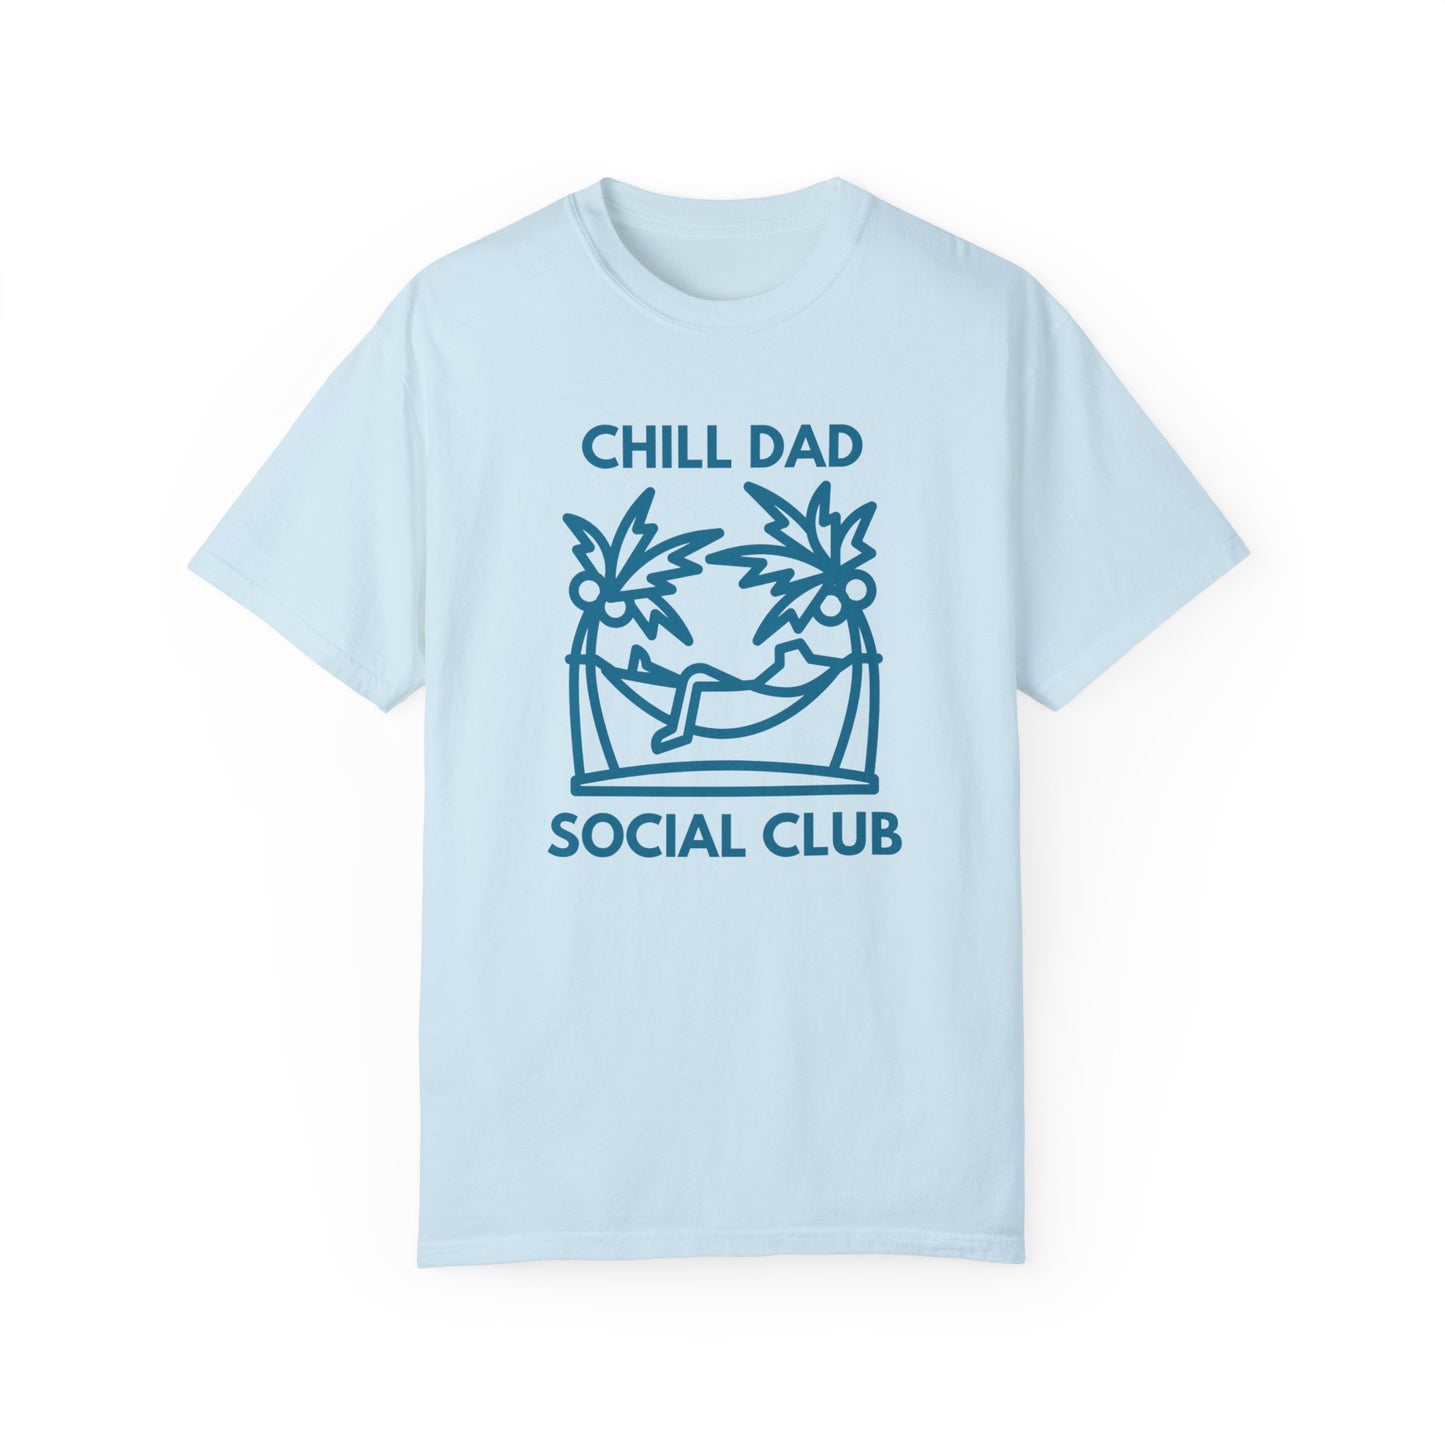 Chill Dad Social Club T-Shirt - Comfort Colors 1717, Ultra-Soft Ring-Spun Cotton, Relaxed Fit